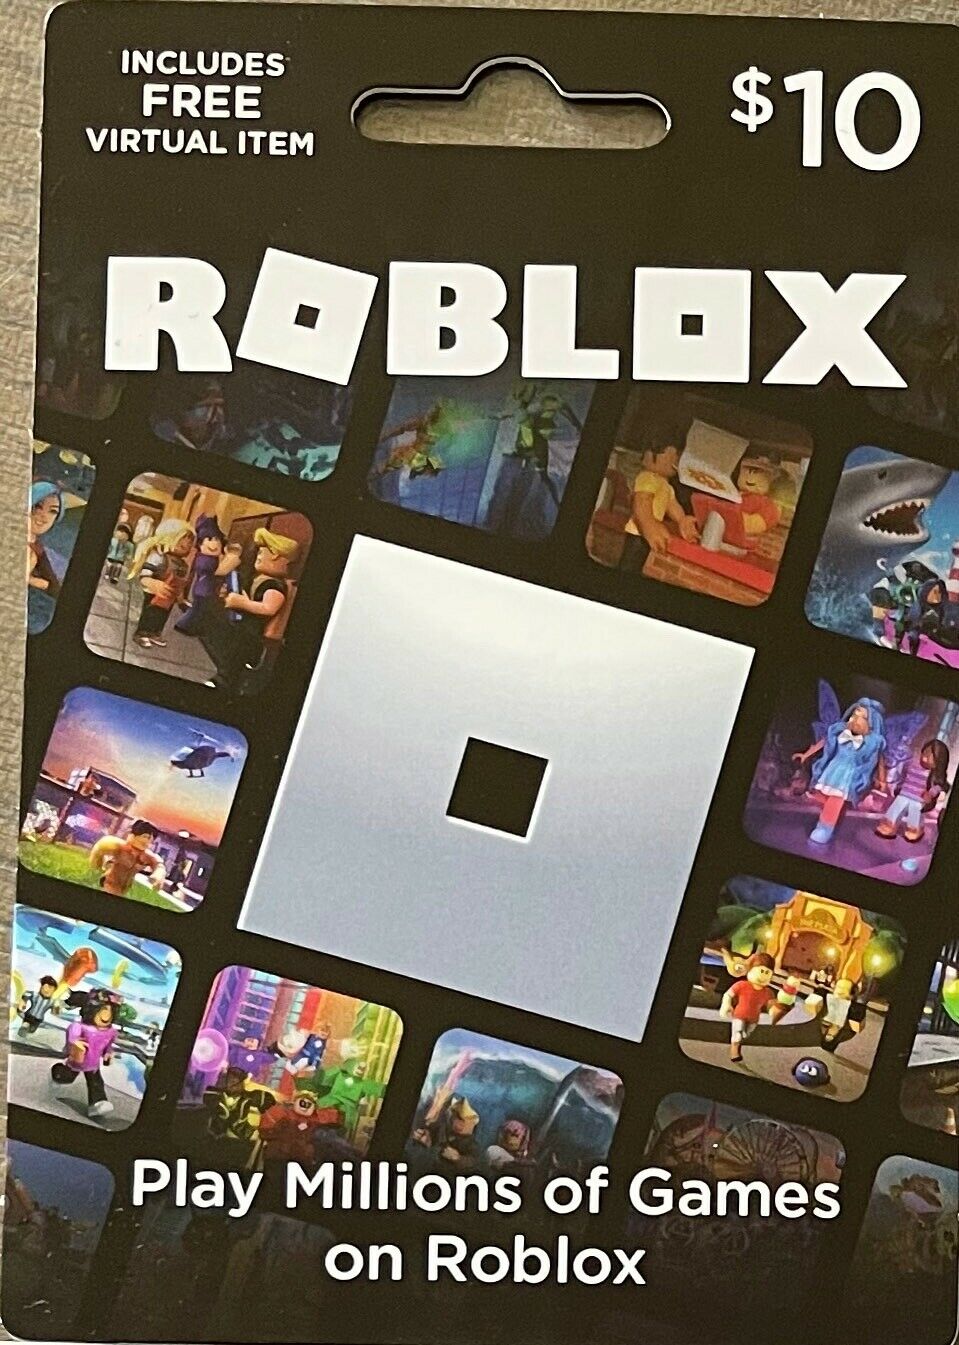 Roblox $10 Gift Card. Includes Free Virtual Item. Physical Card Unscratched.